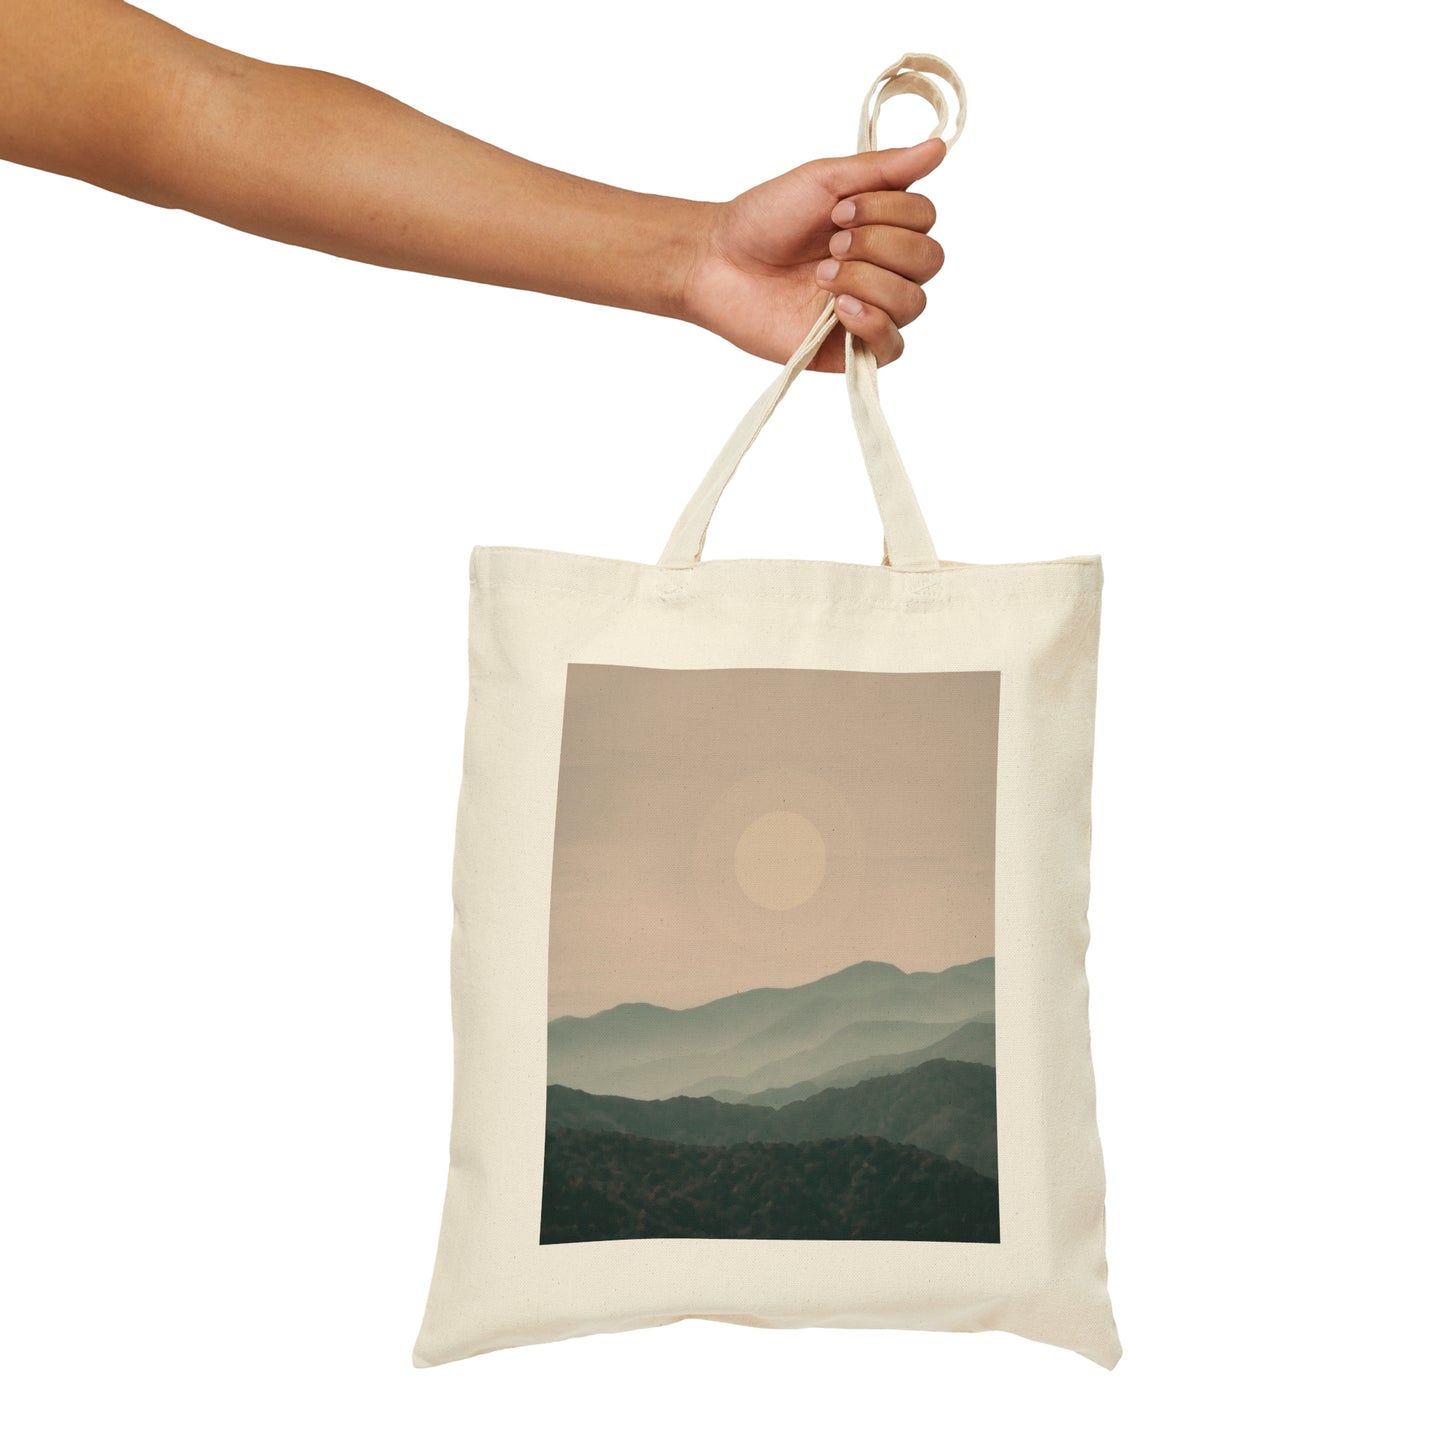 Landscape Foggy Forest Mountains Nature Modern Art Aesthetics Canvas Shopping Cotton Tote Bag